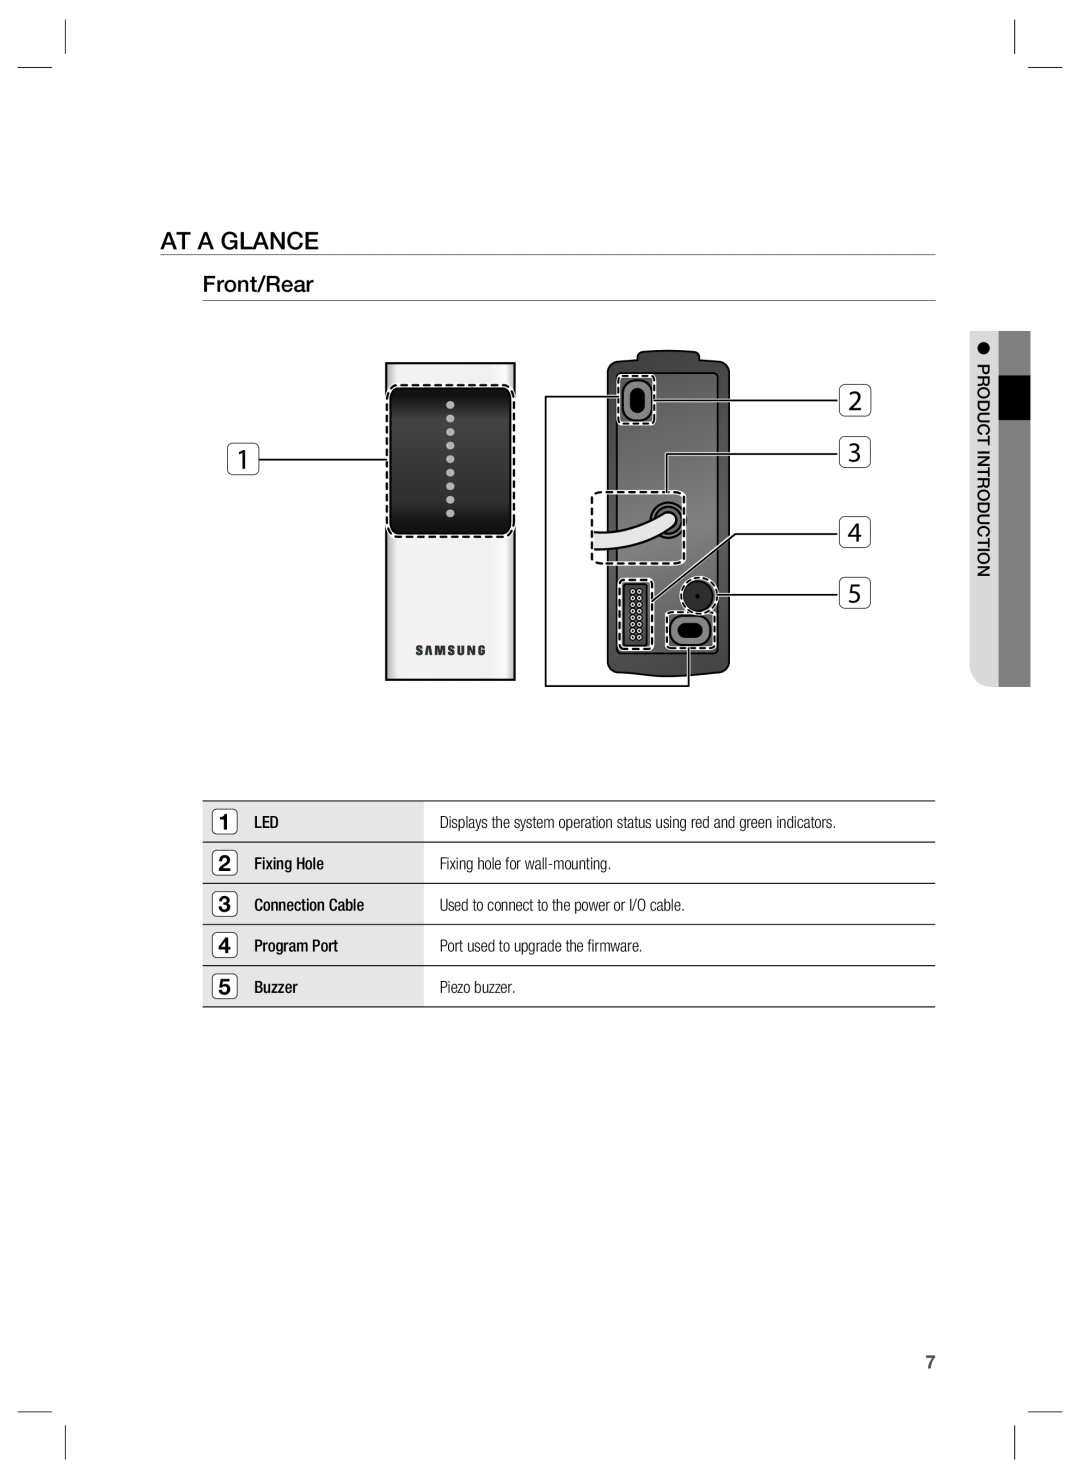 Samsung SSA-S1000 user manual At A Glance, 3 4 5, Front/Rear 